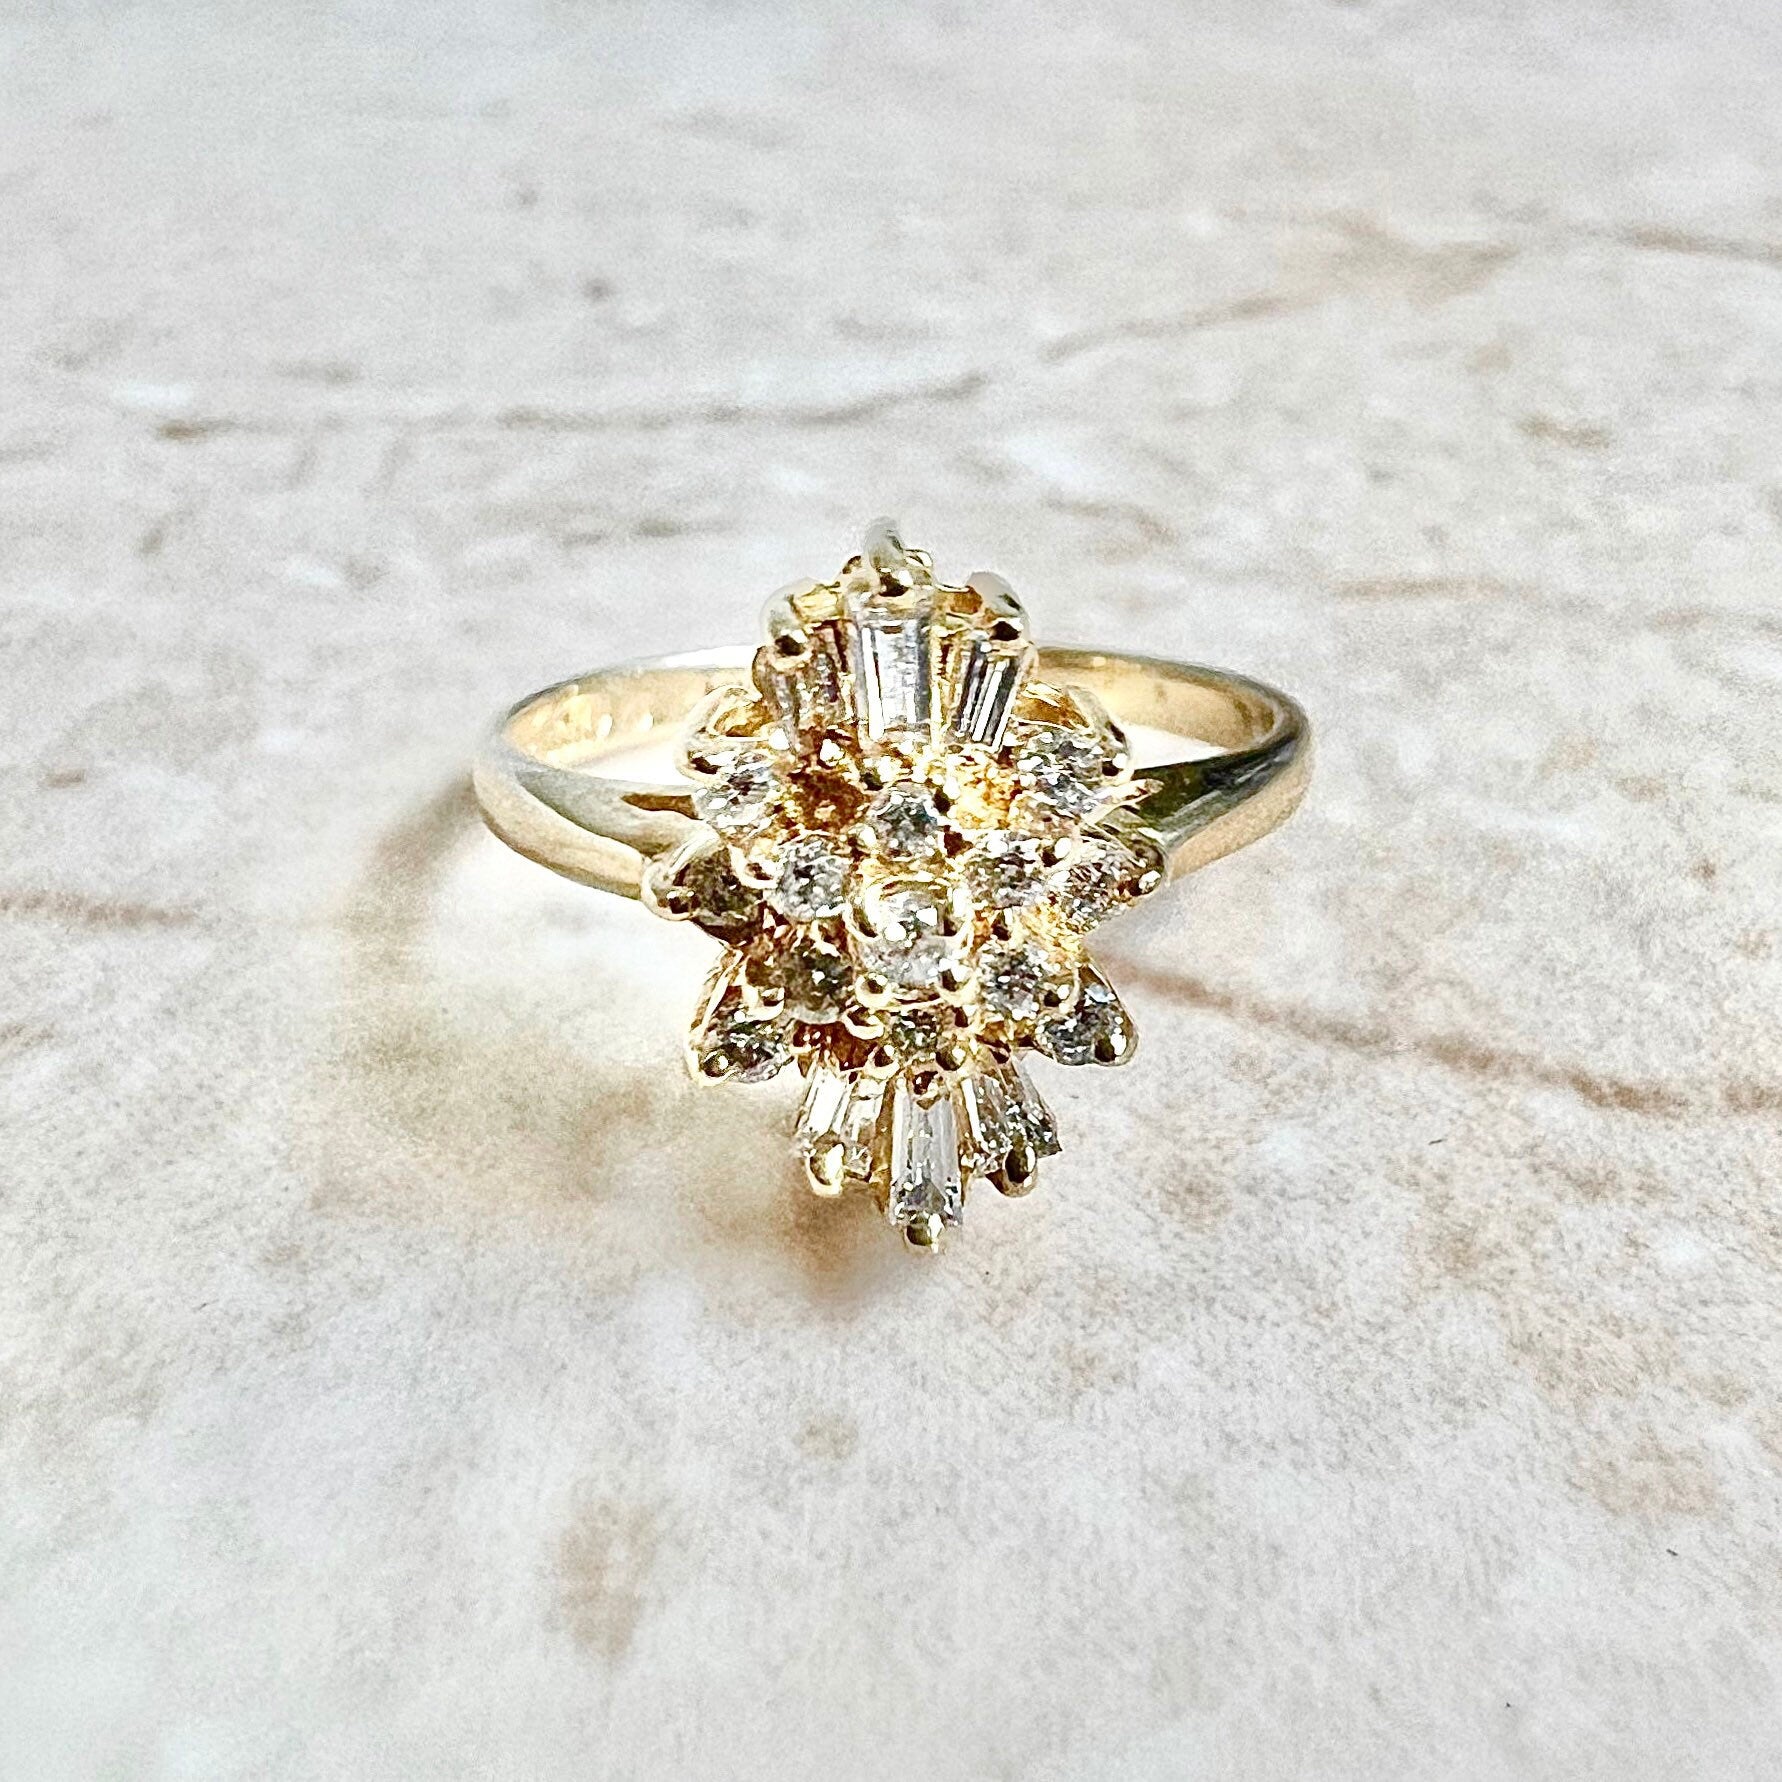 Vintage 14K Diamond Cluster Ring - Yellow Gold Diamond Cocktail Ring - Anniversary Ring - Navette Ring - Birthday Gift - Best Gifts For Her